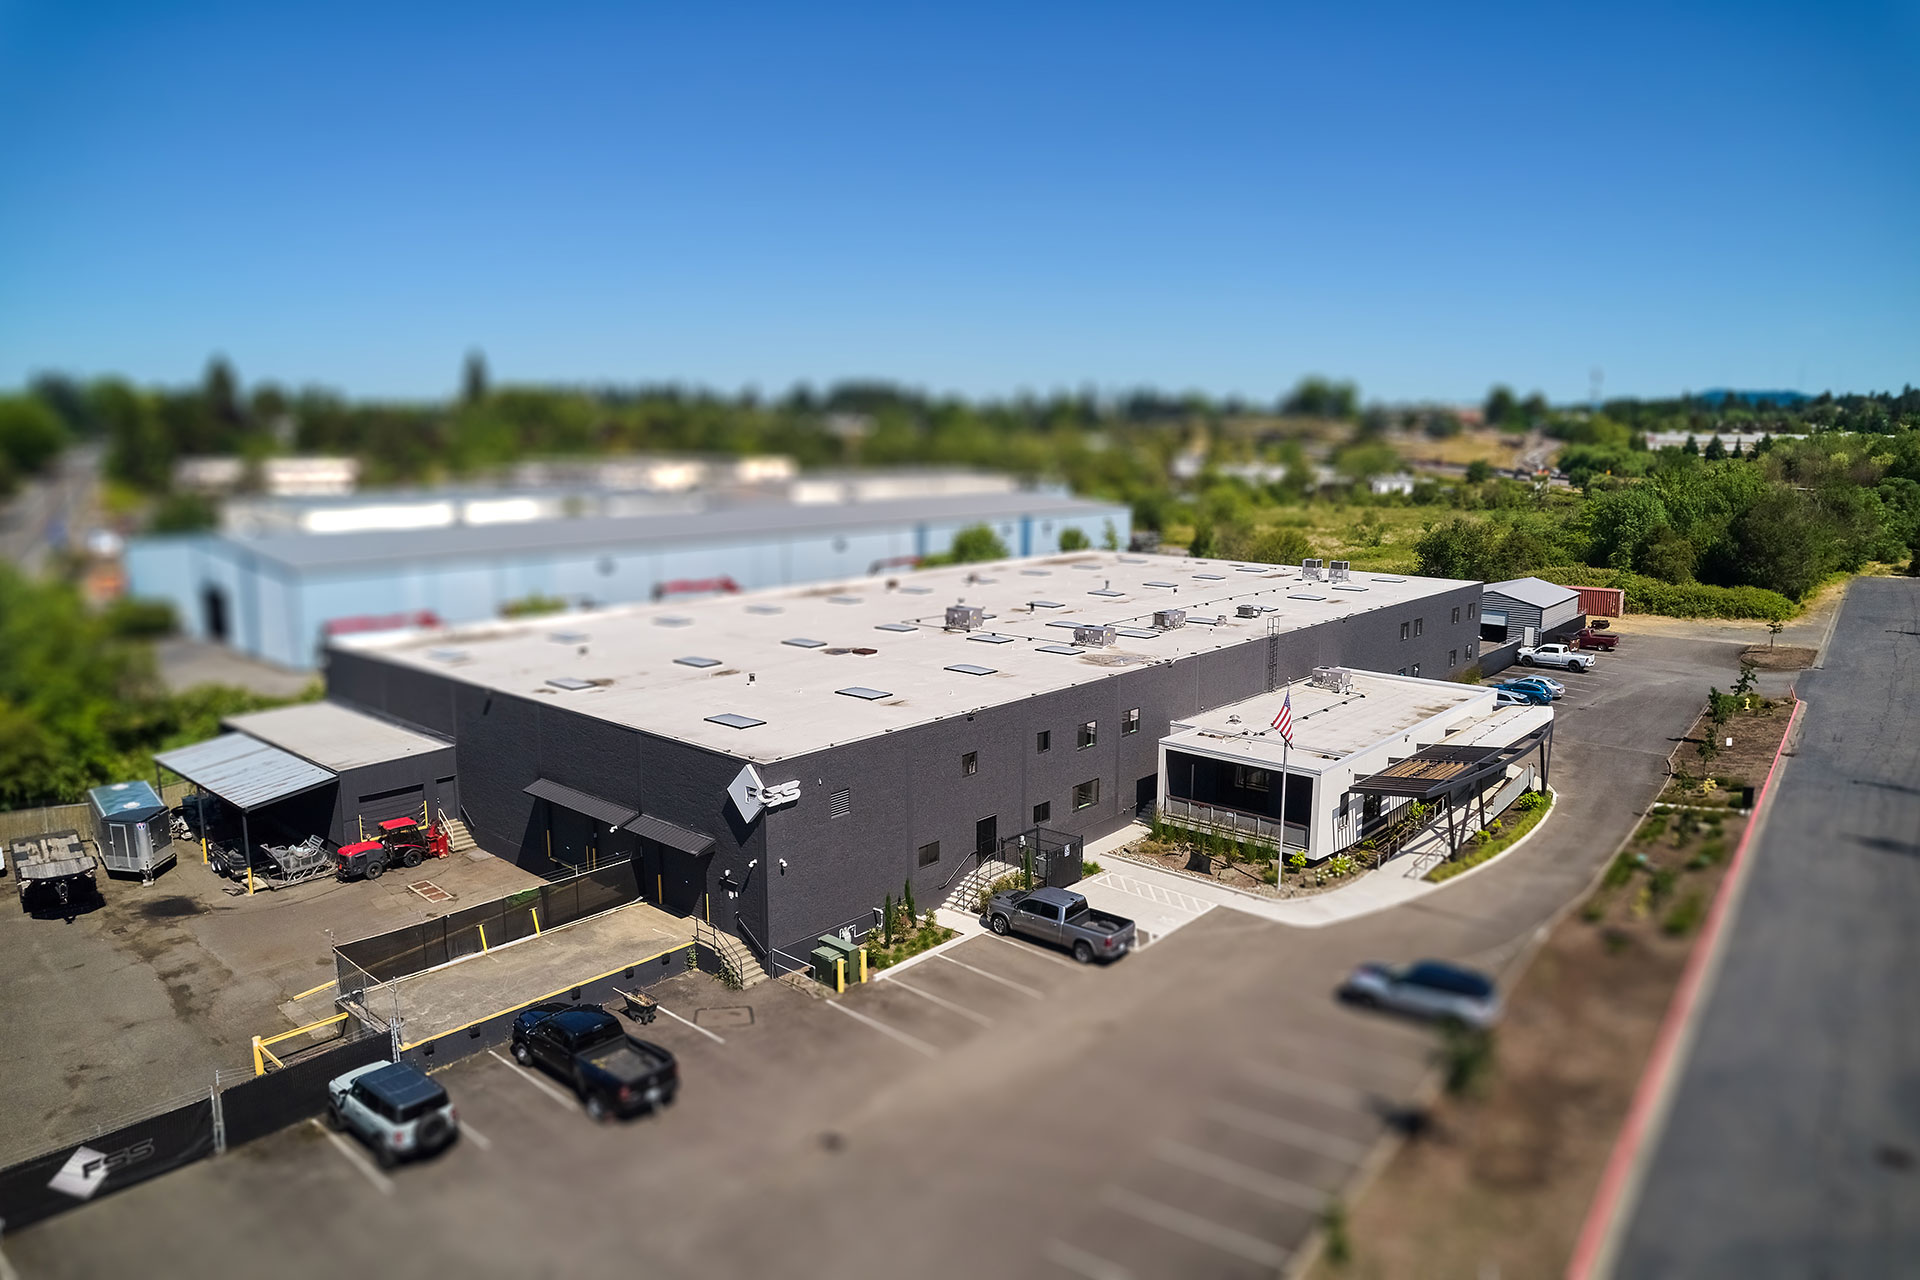 This is an overhead view of the entire building after the warehouse renovation.